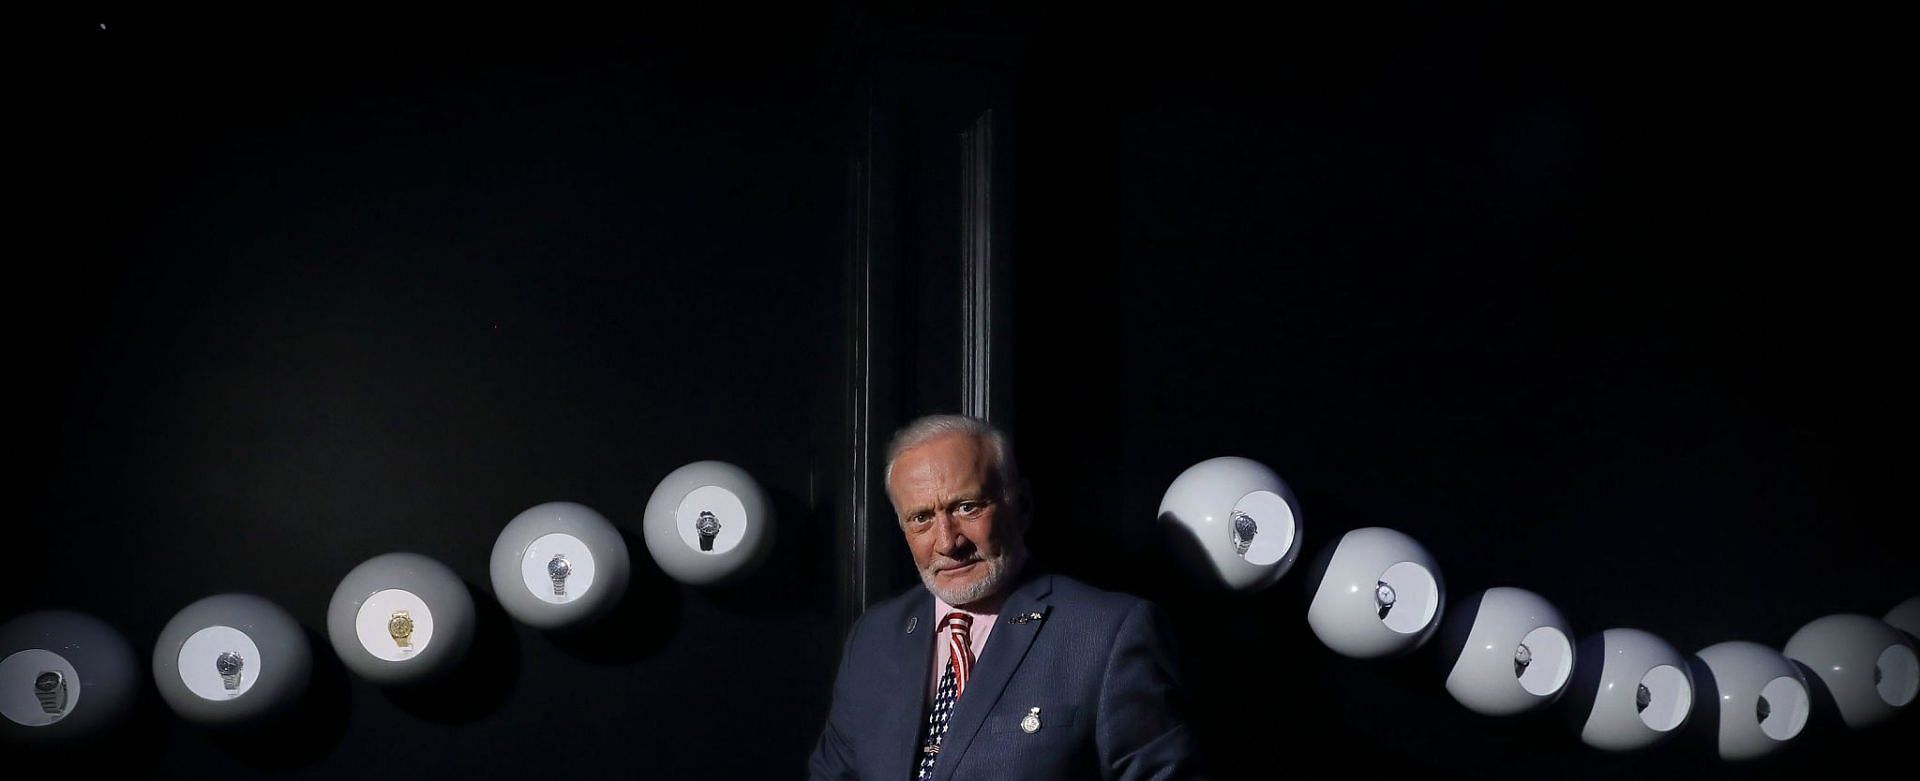 Buzz Aldrin has been married four times in his lifetime (Image via Getty Images)